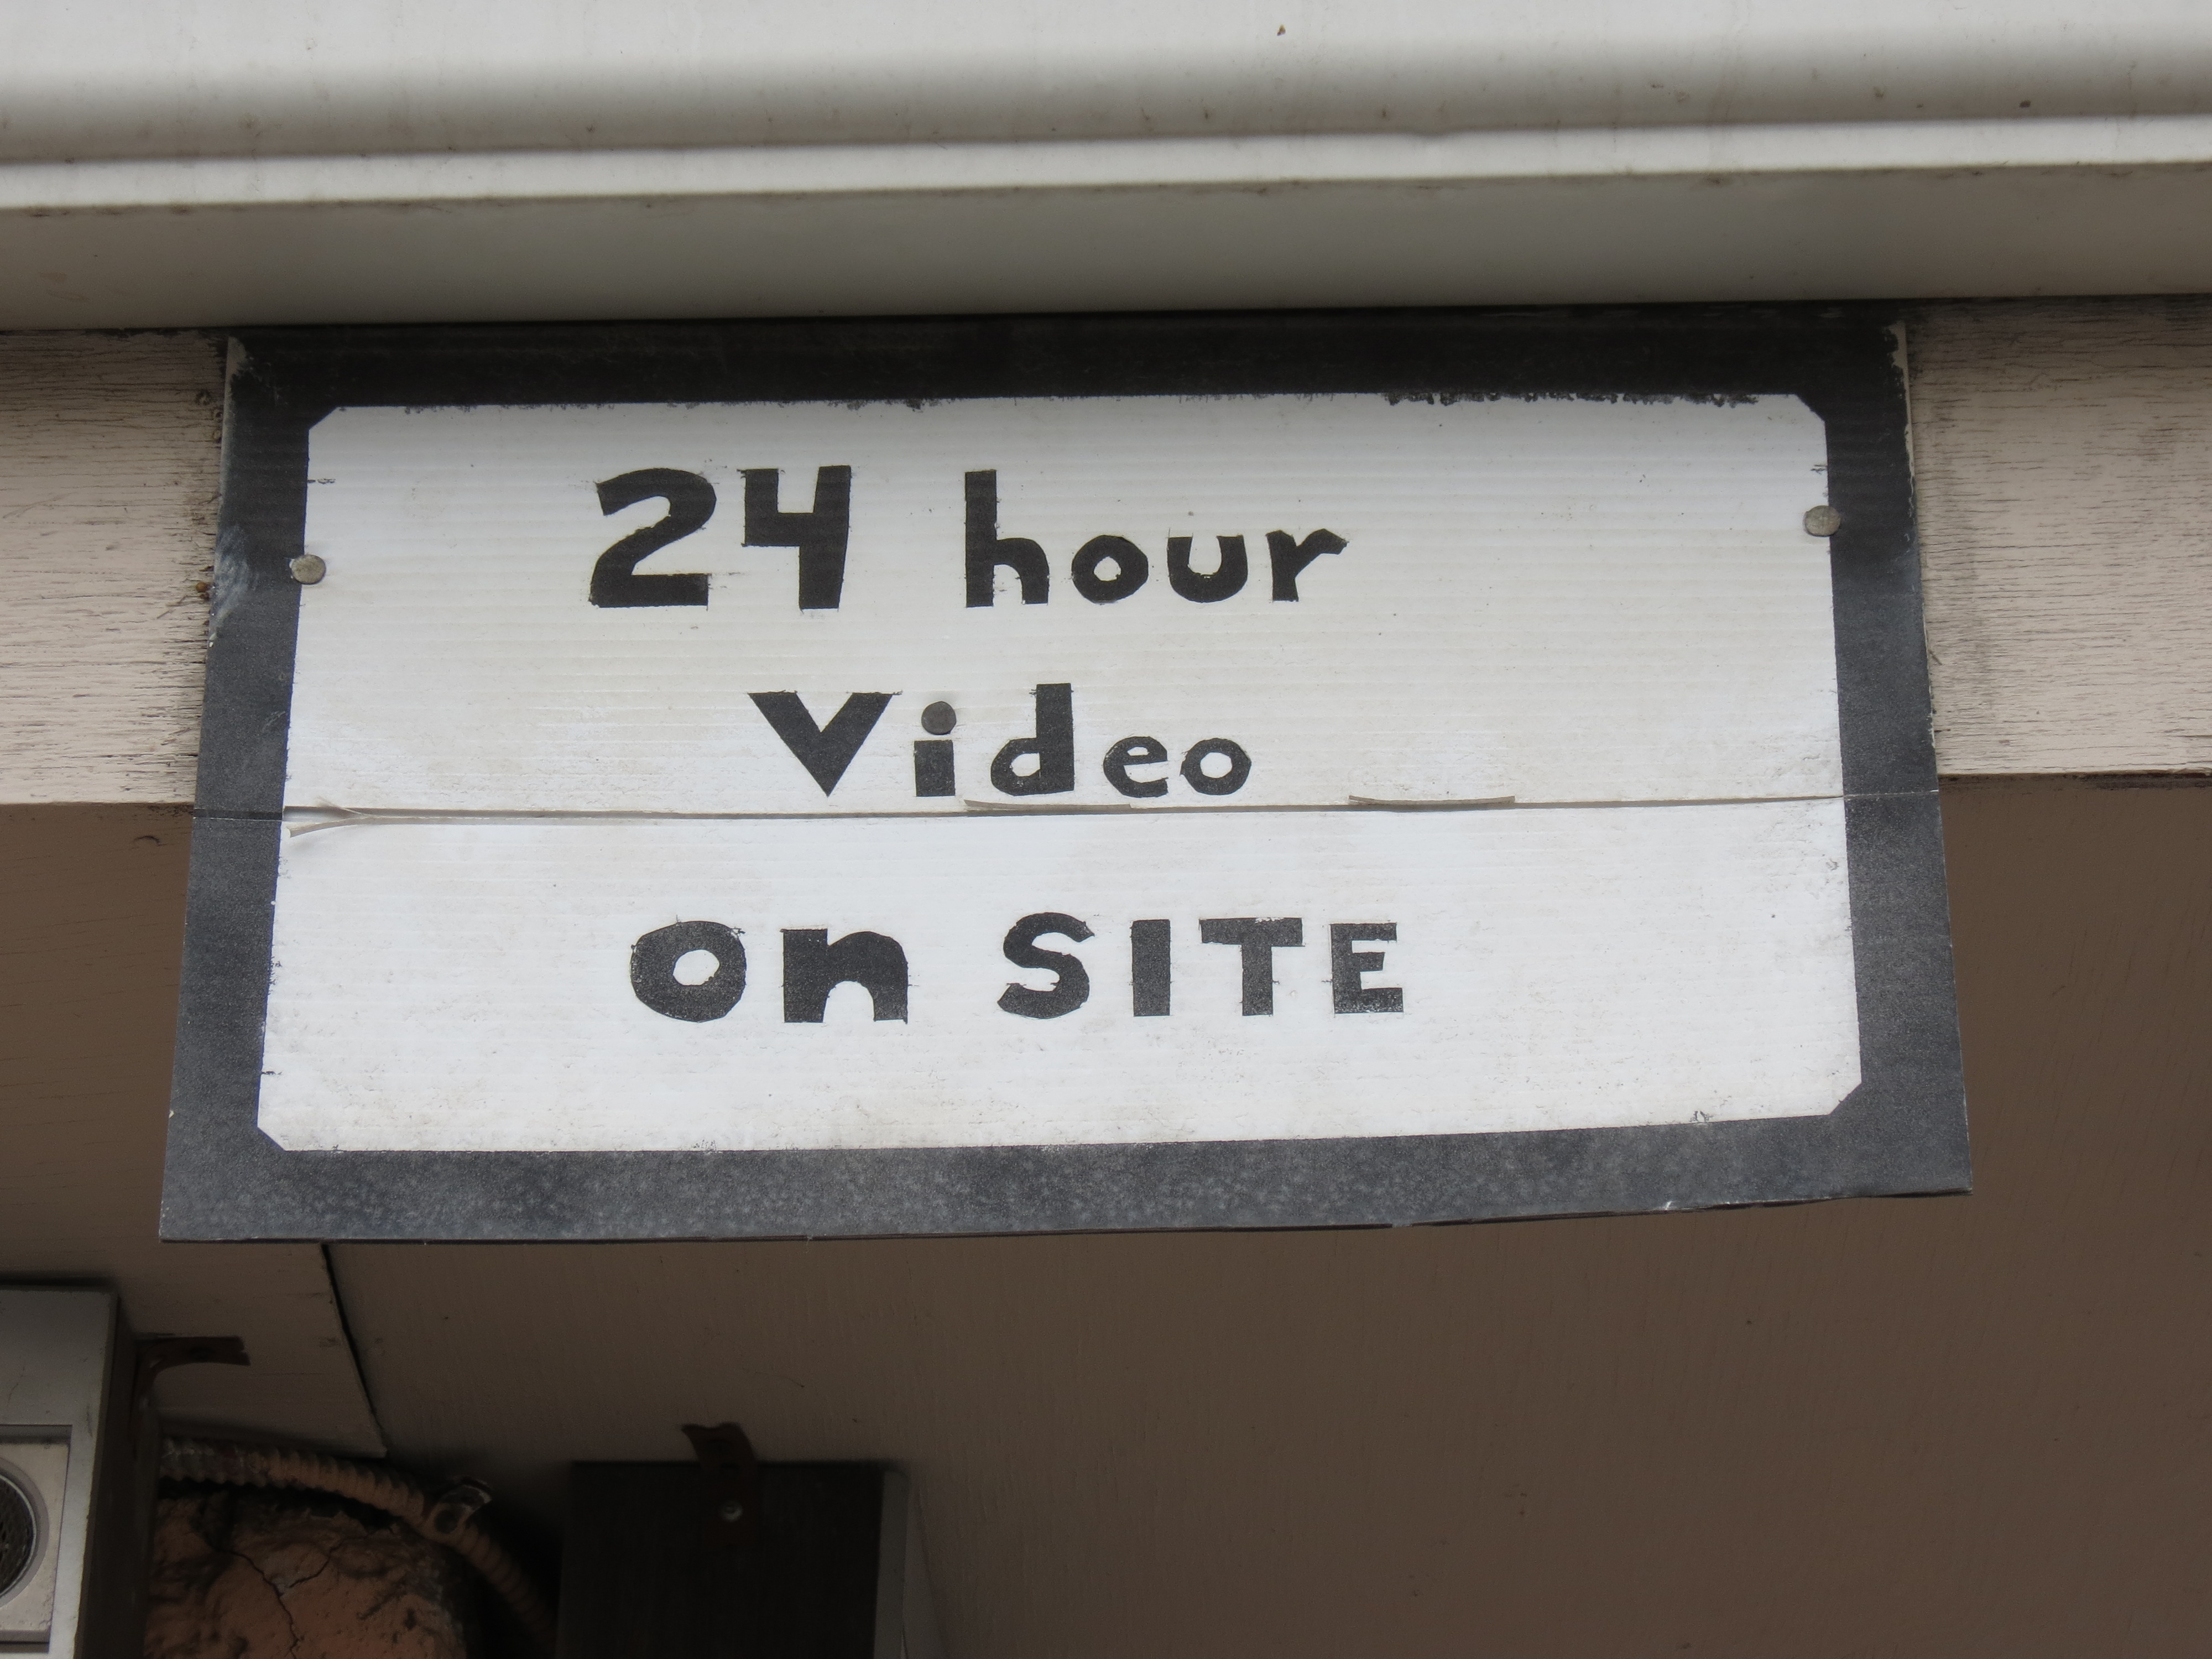 24 hour video on site